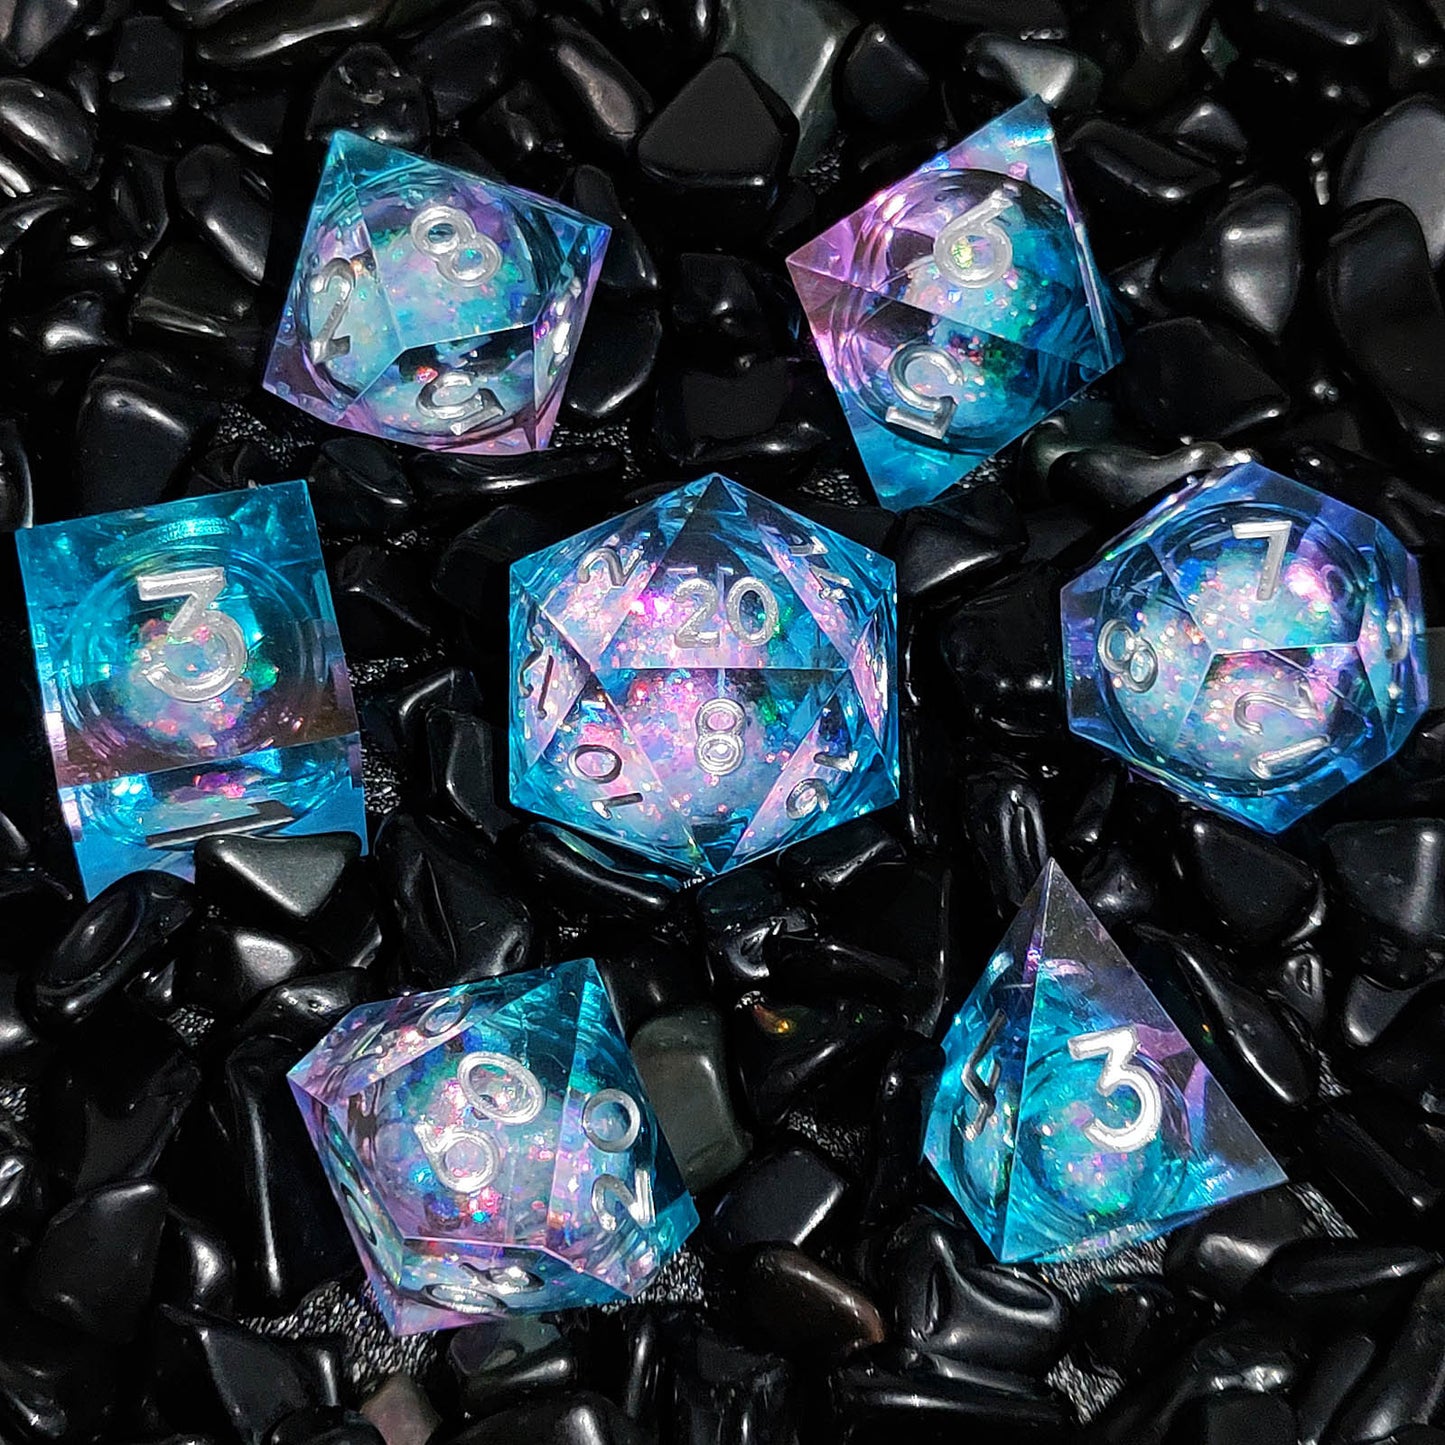 Magical Glamor DND Dice: Polyhedral Resin Dice with Glitter Liquid Core for Dungeons & Dragons, RPGs, and Board Games – 7 Piece Sharp Edge DND Dice Set with Case